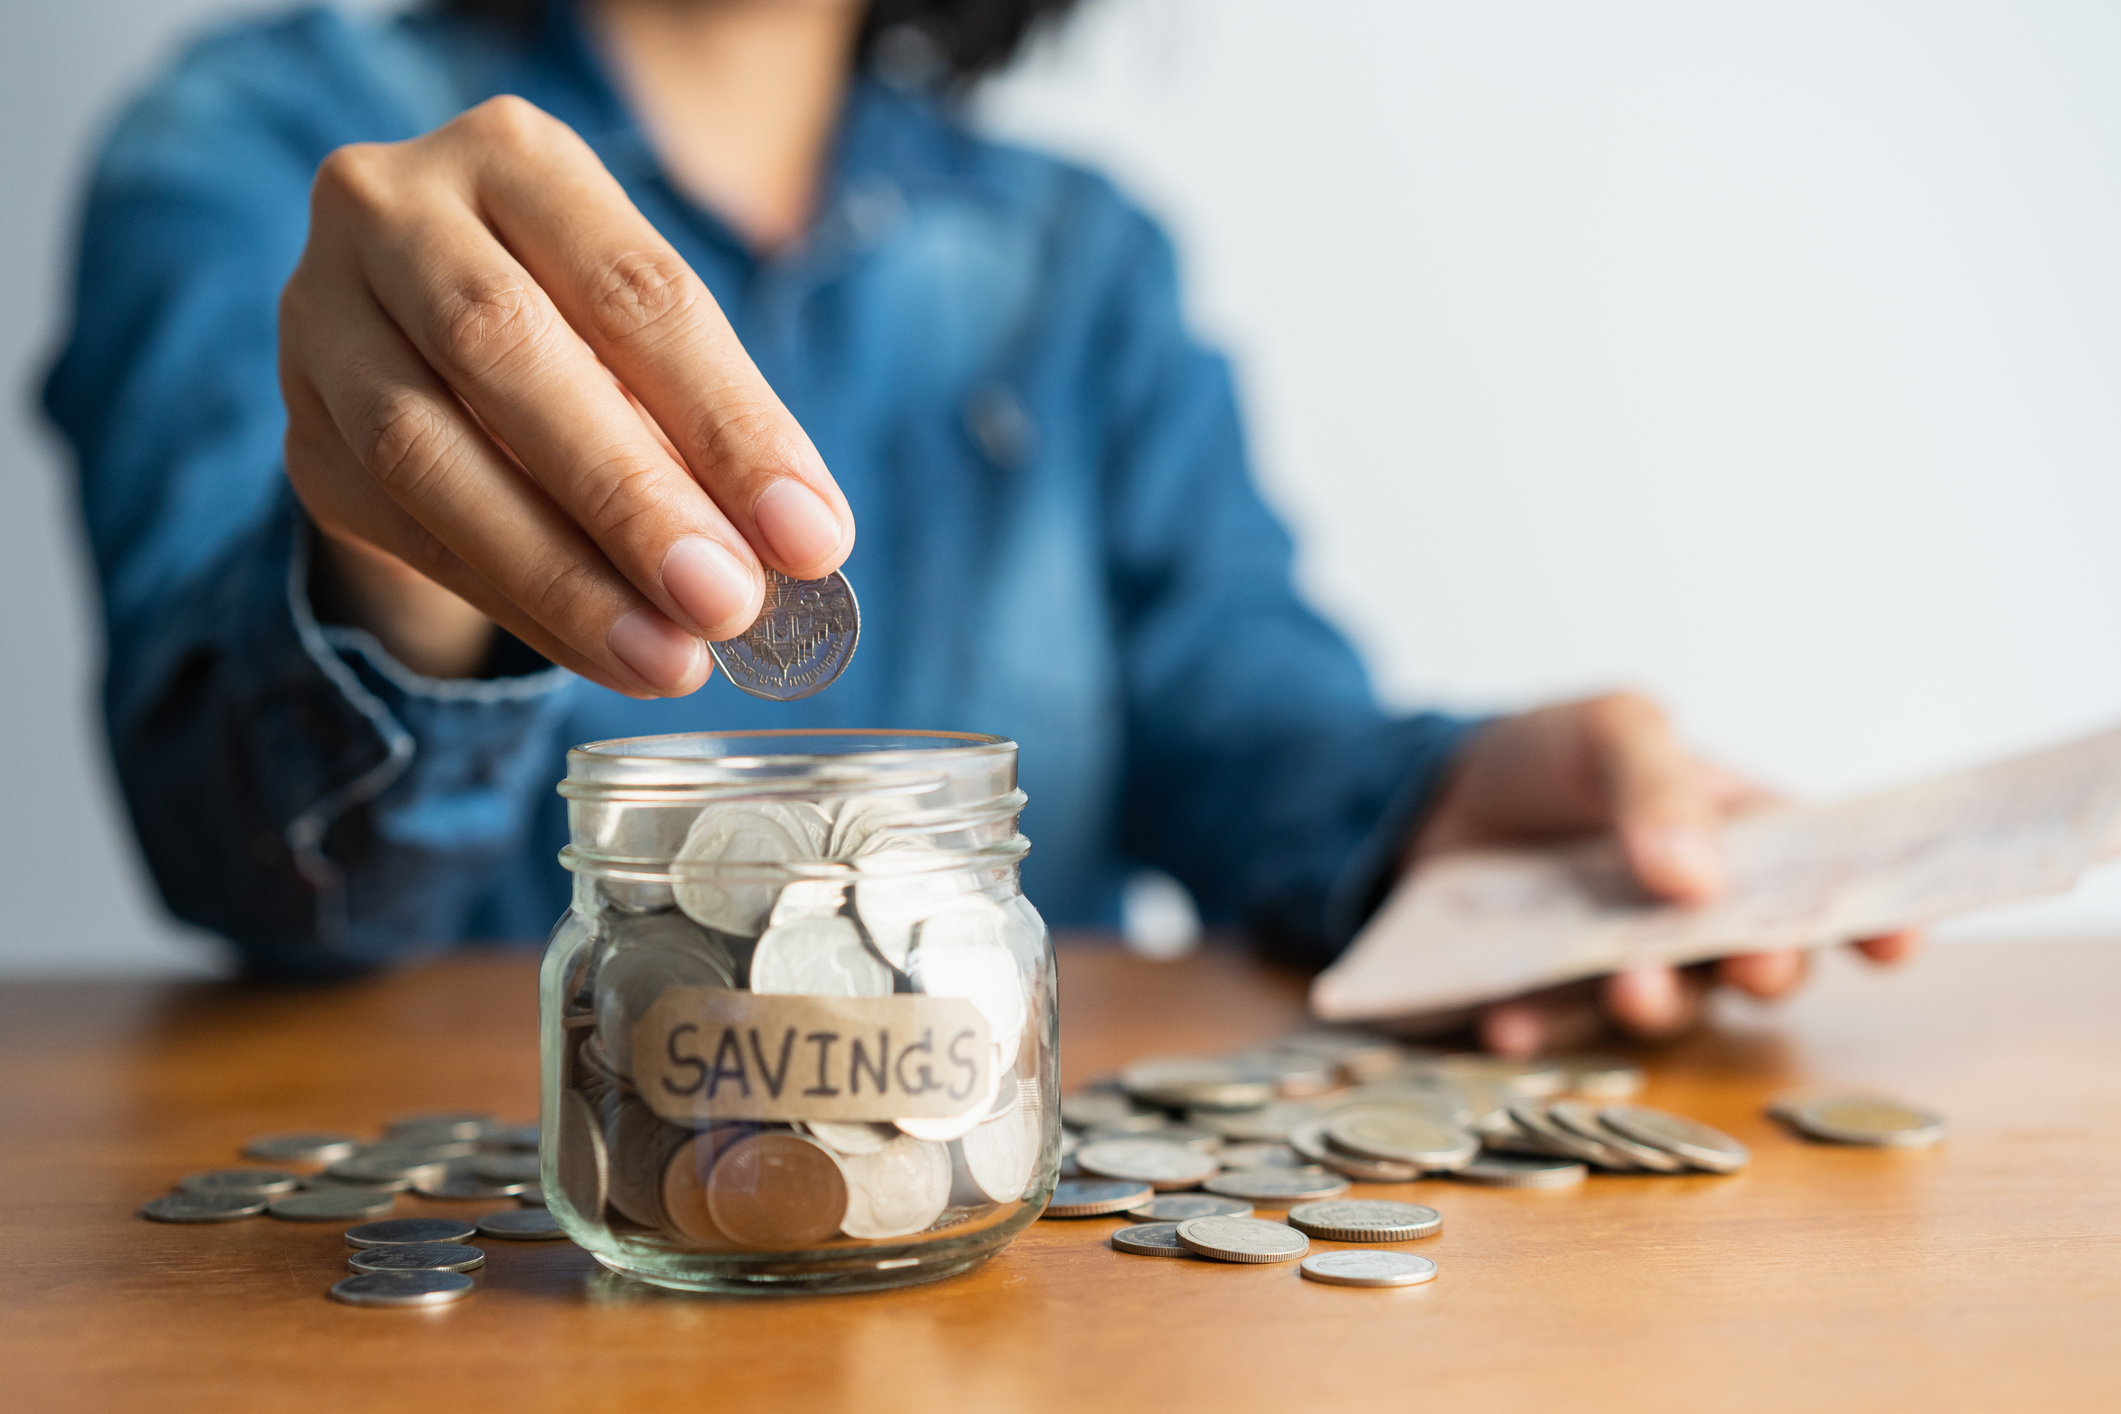 How to Find a High-Interest Savings Account?